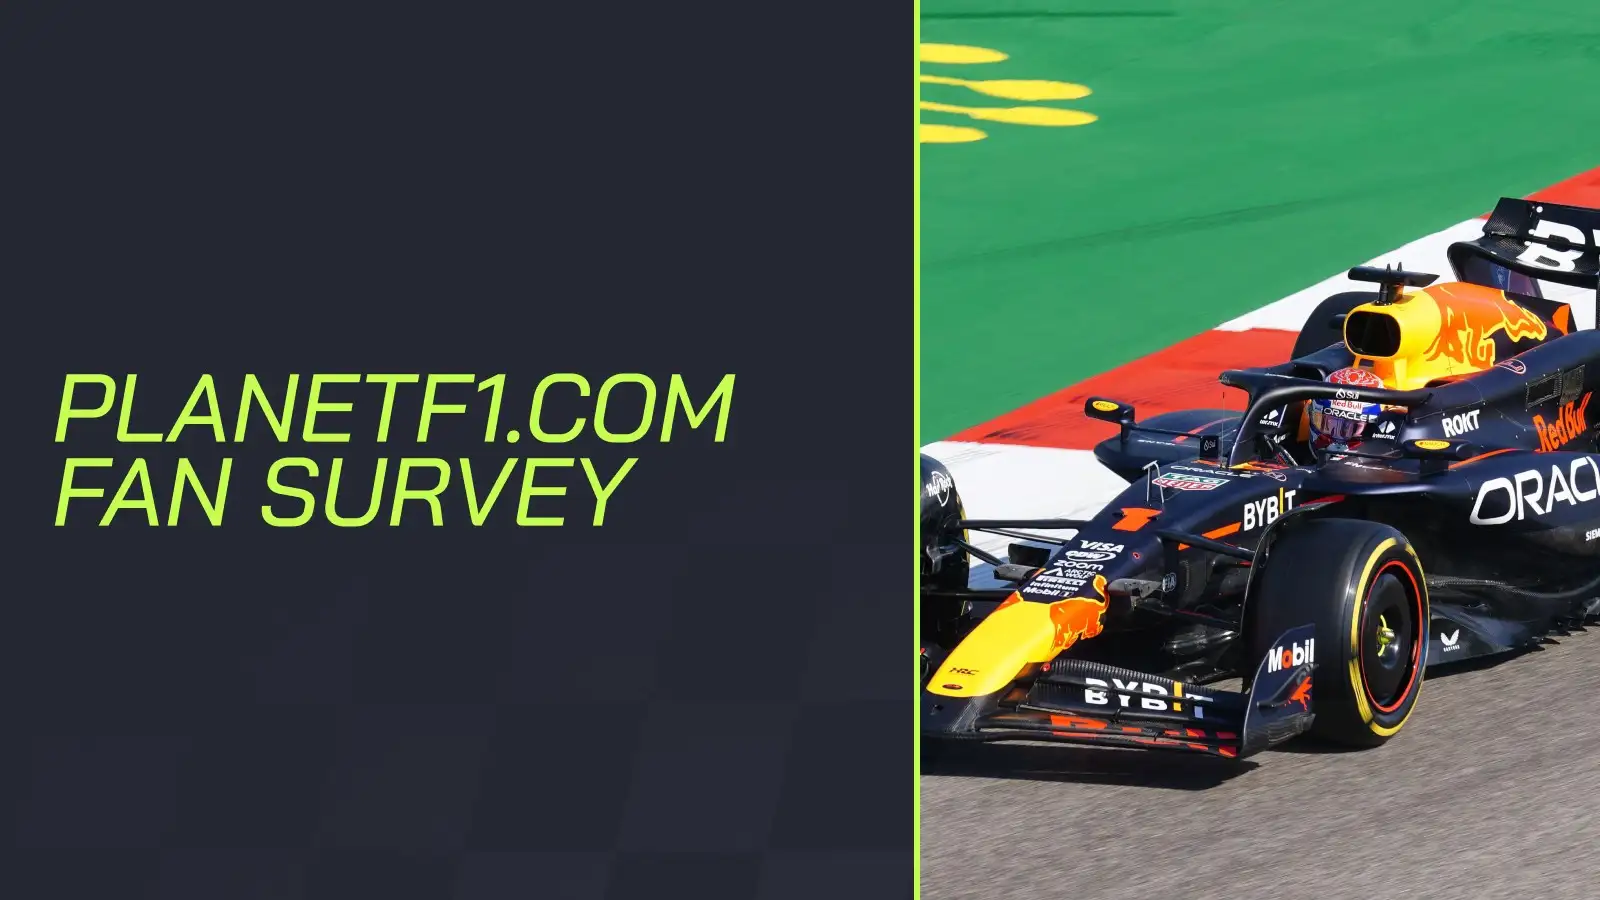 F1 fan survey: Your favourite drivers, teams and more F1 questions